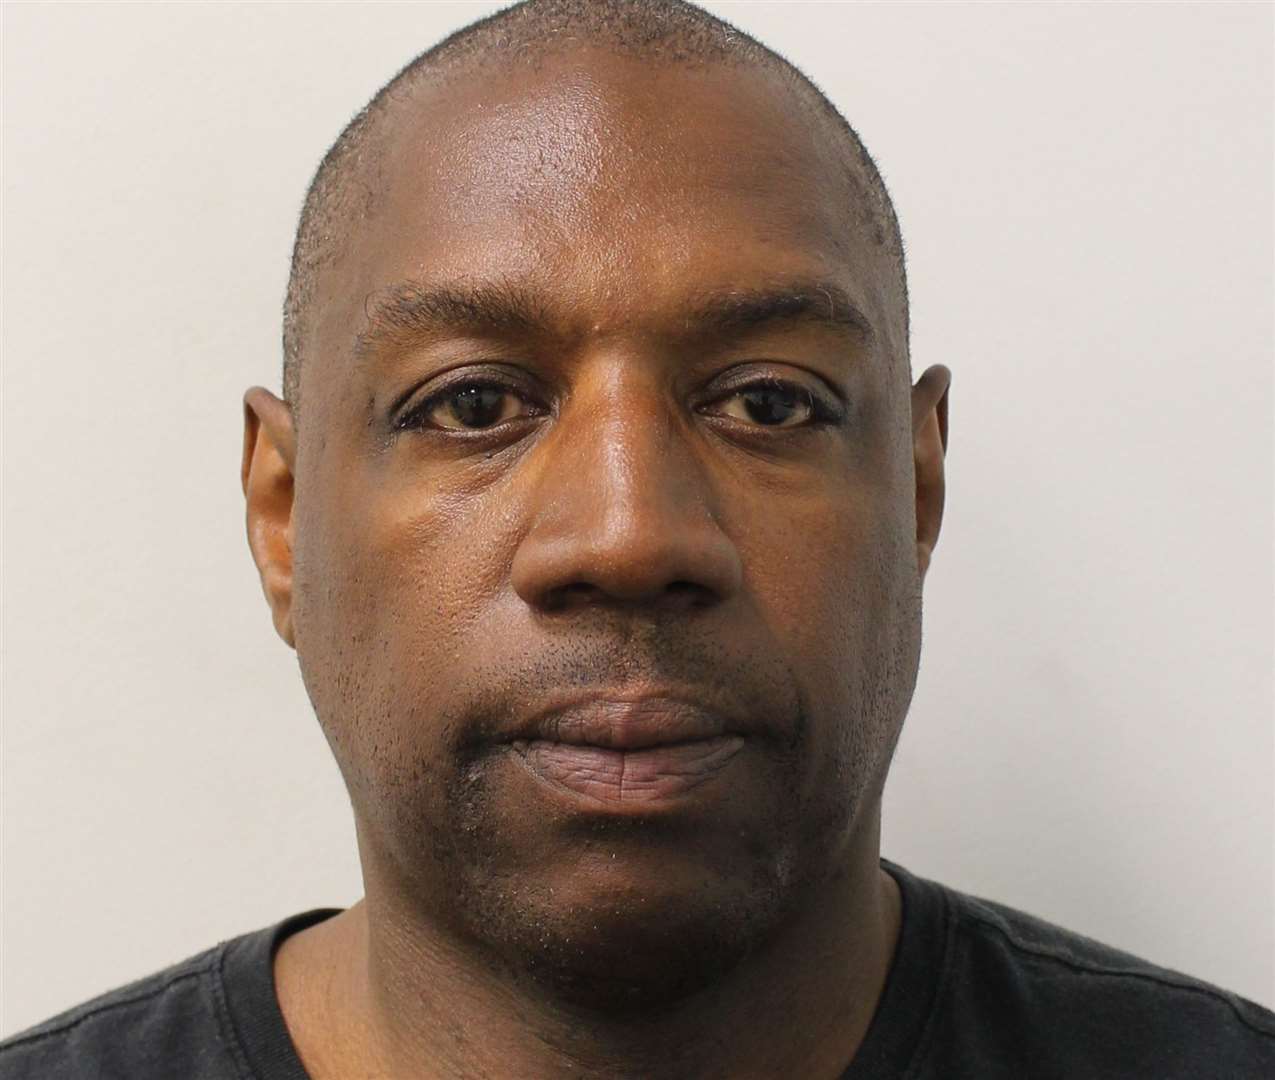 Antonio Chambers, 47, of Vicarage Gate, Kensington, was sentenced to 10 years and nine months’ imprisonment. Picture: Met Police